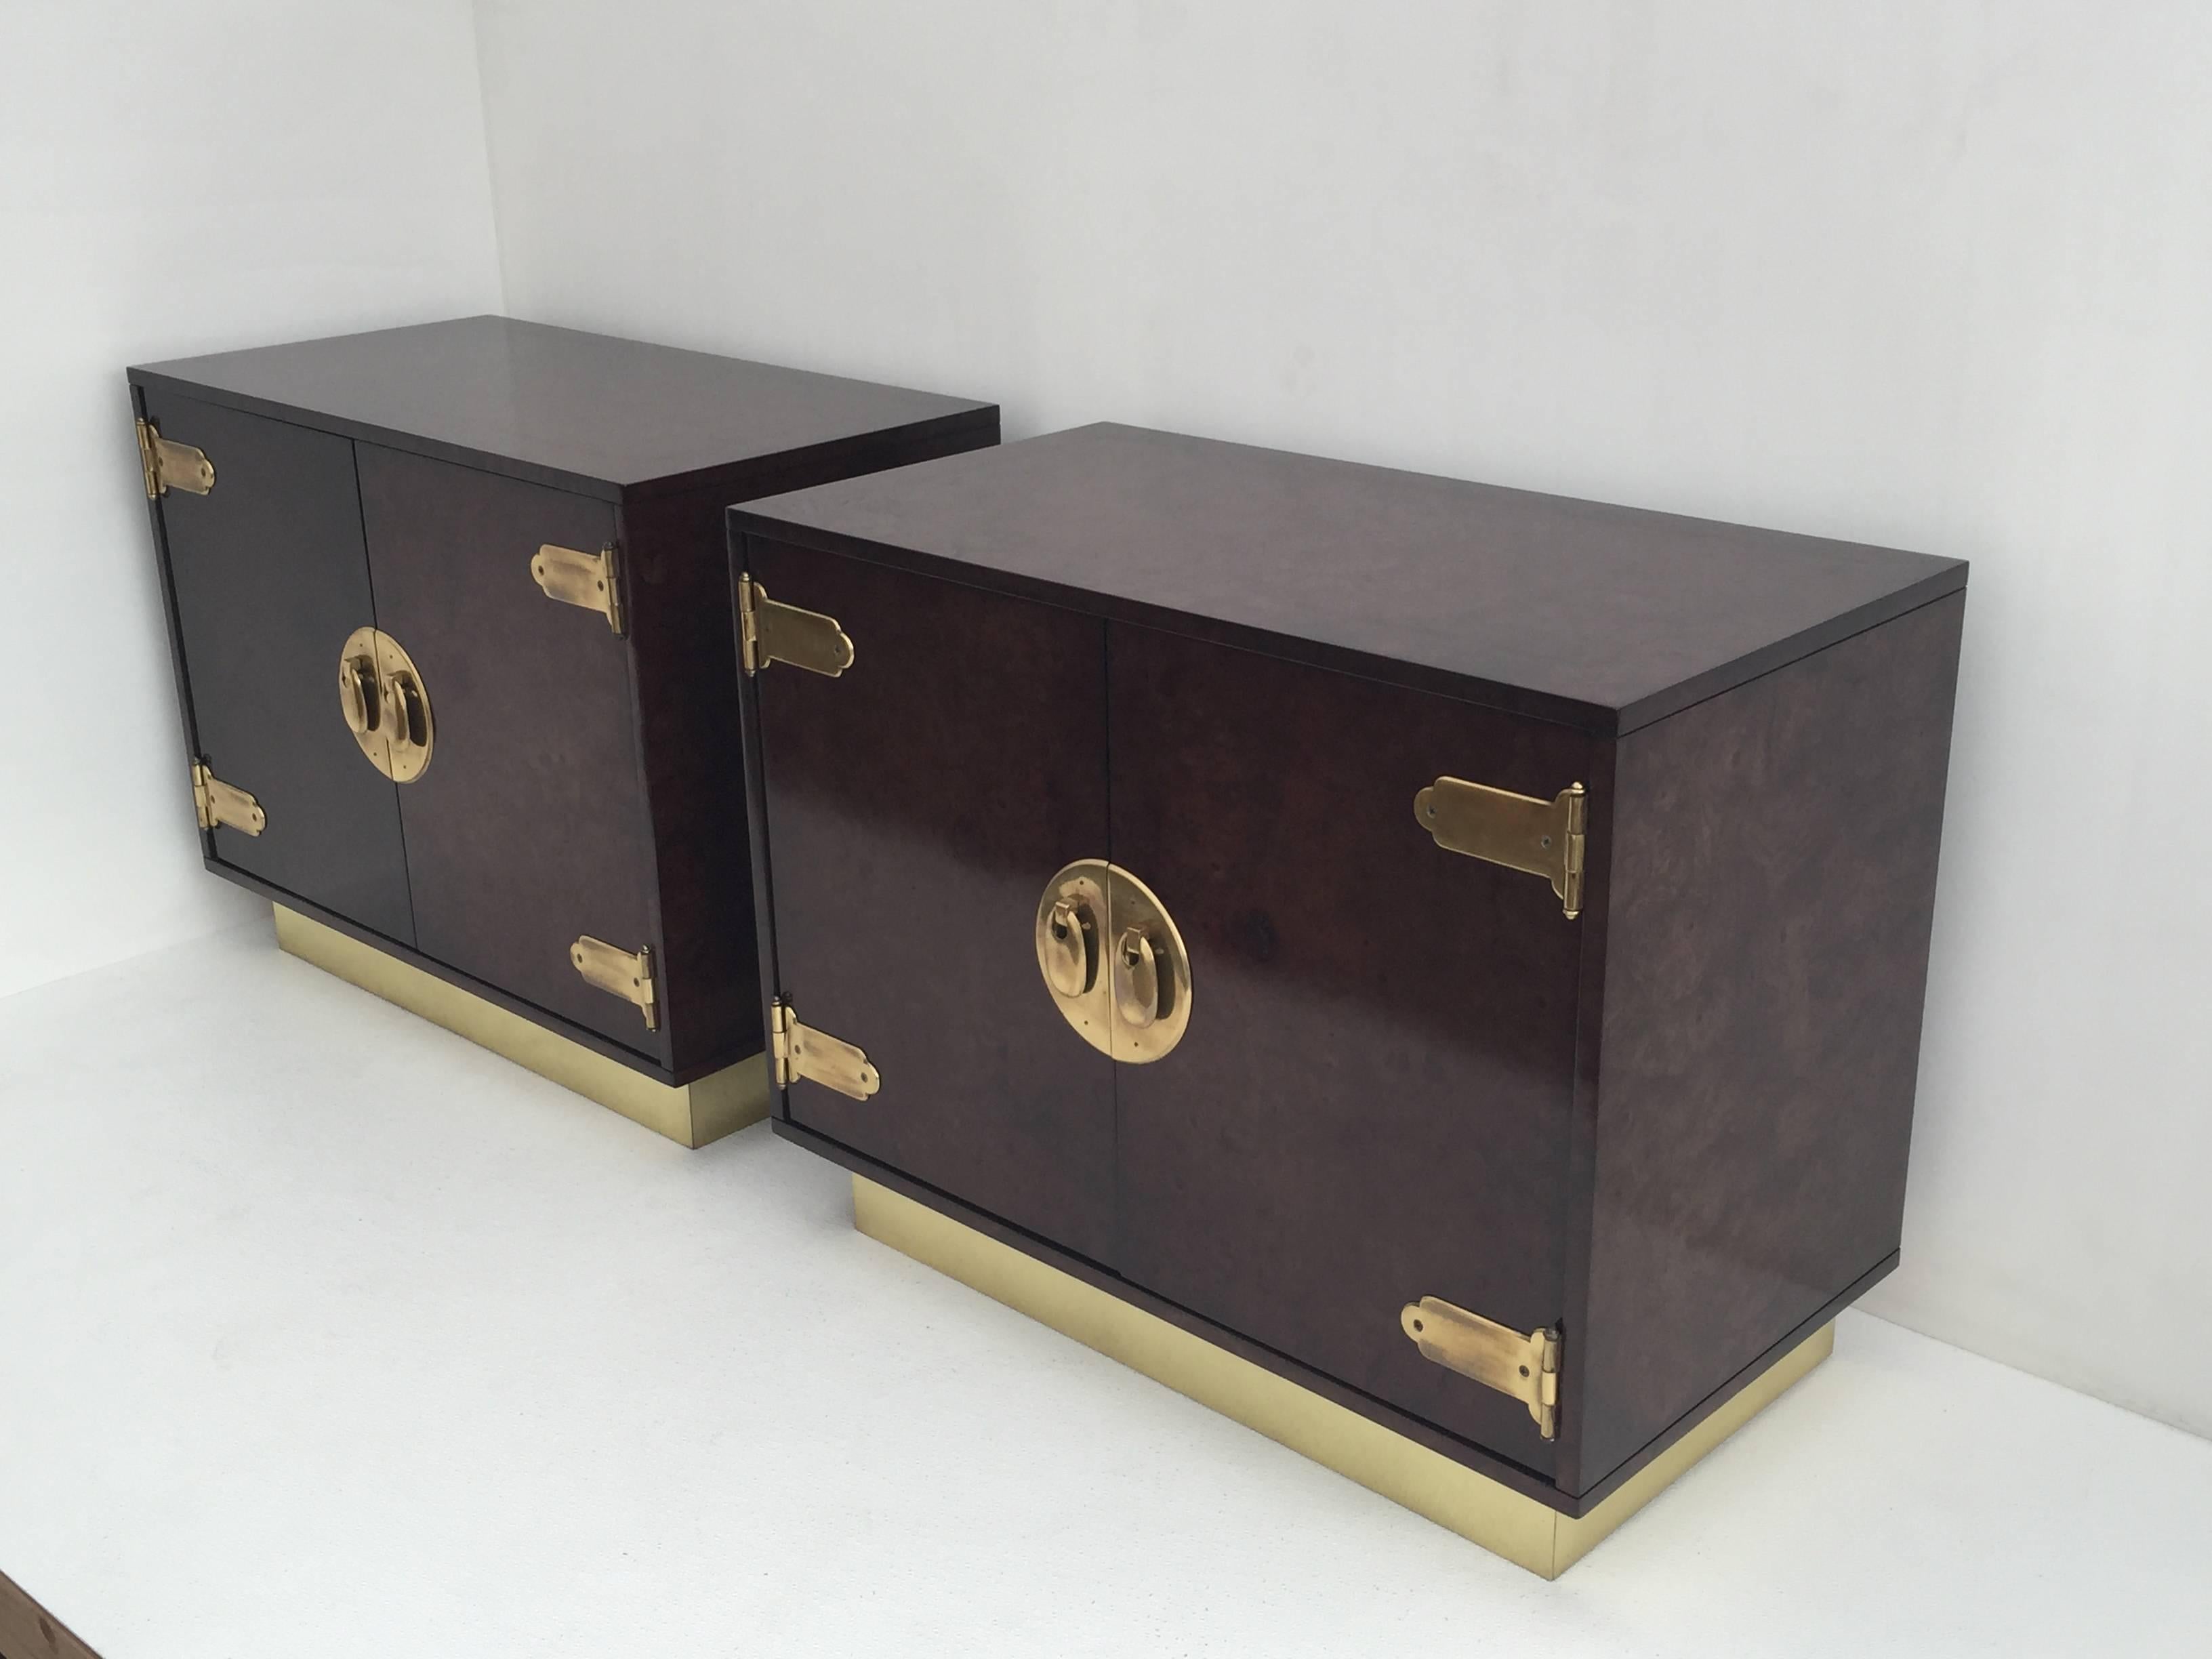 Pair of Mastercraft brown burl wood and brass bedside tables.
There is one pullout drawer and one shelf inside.